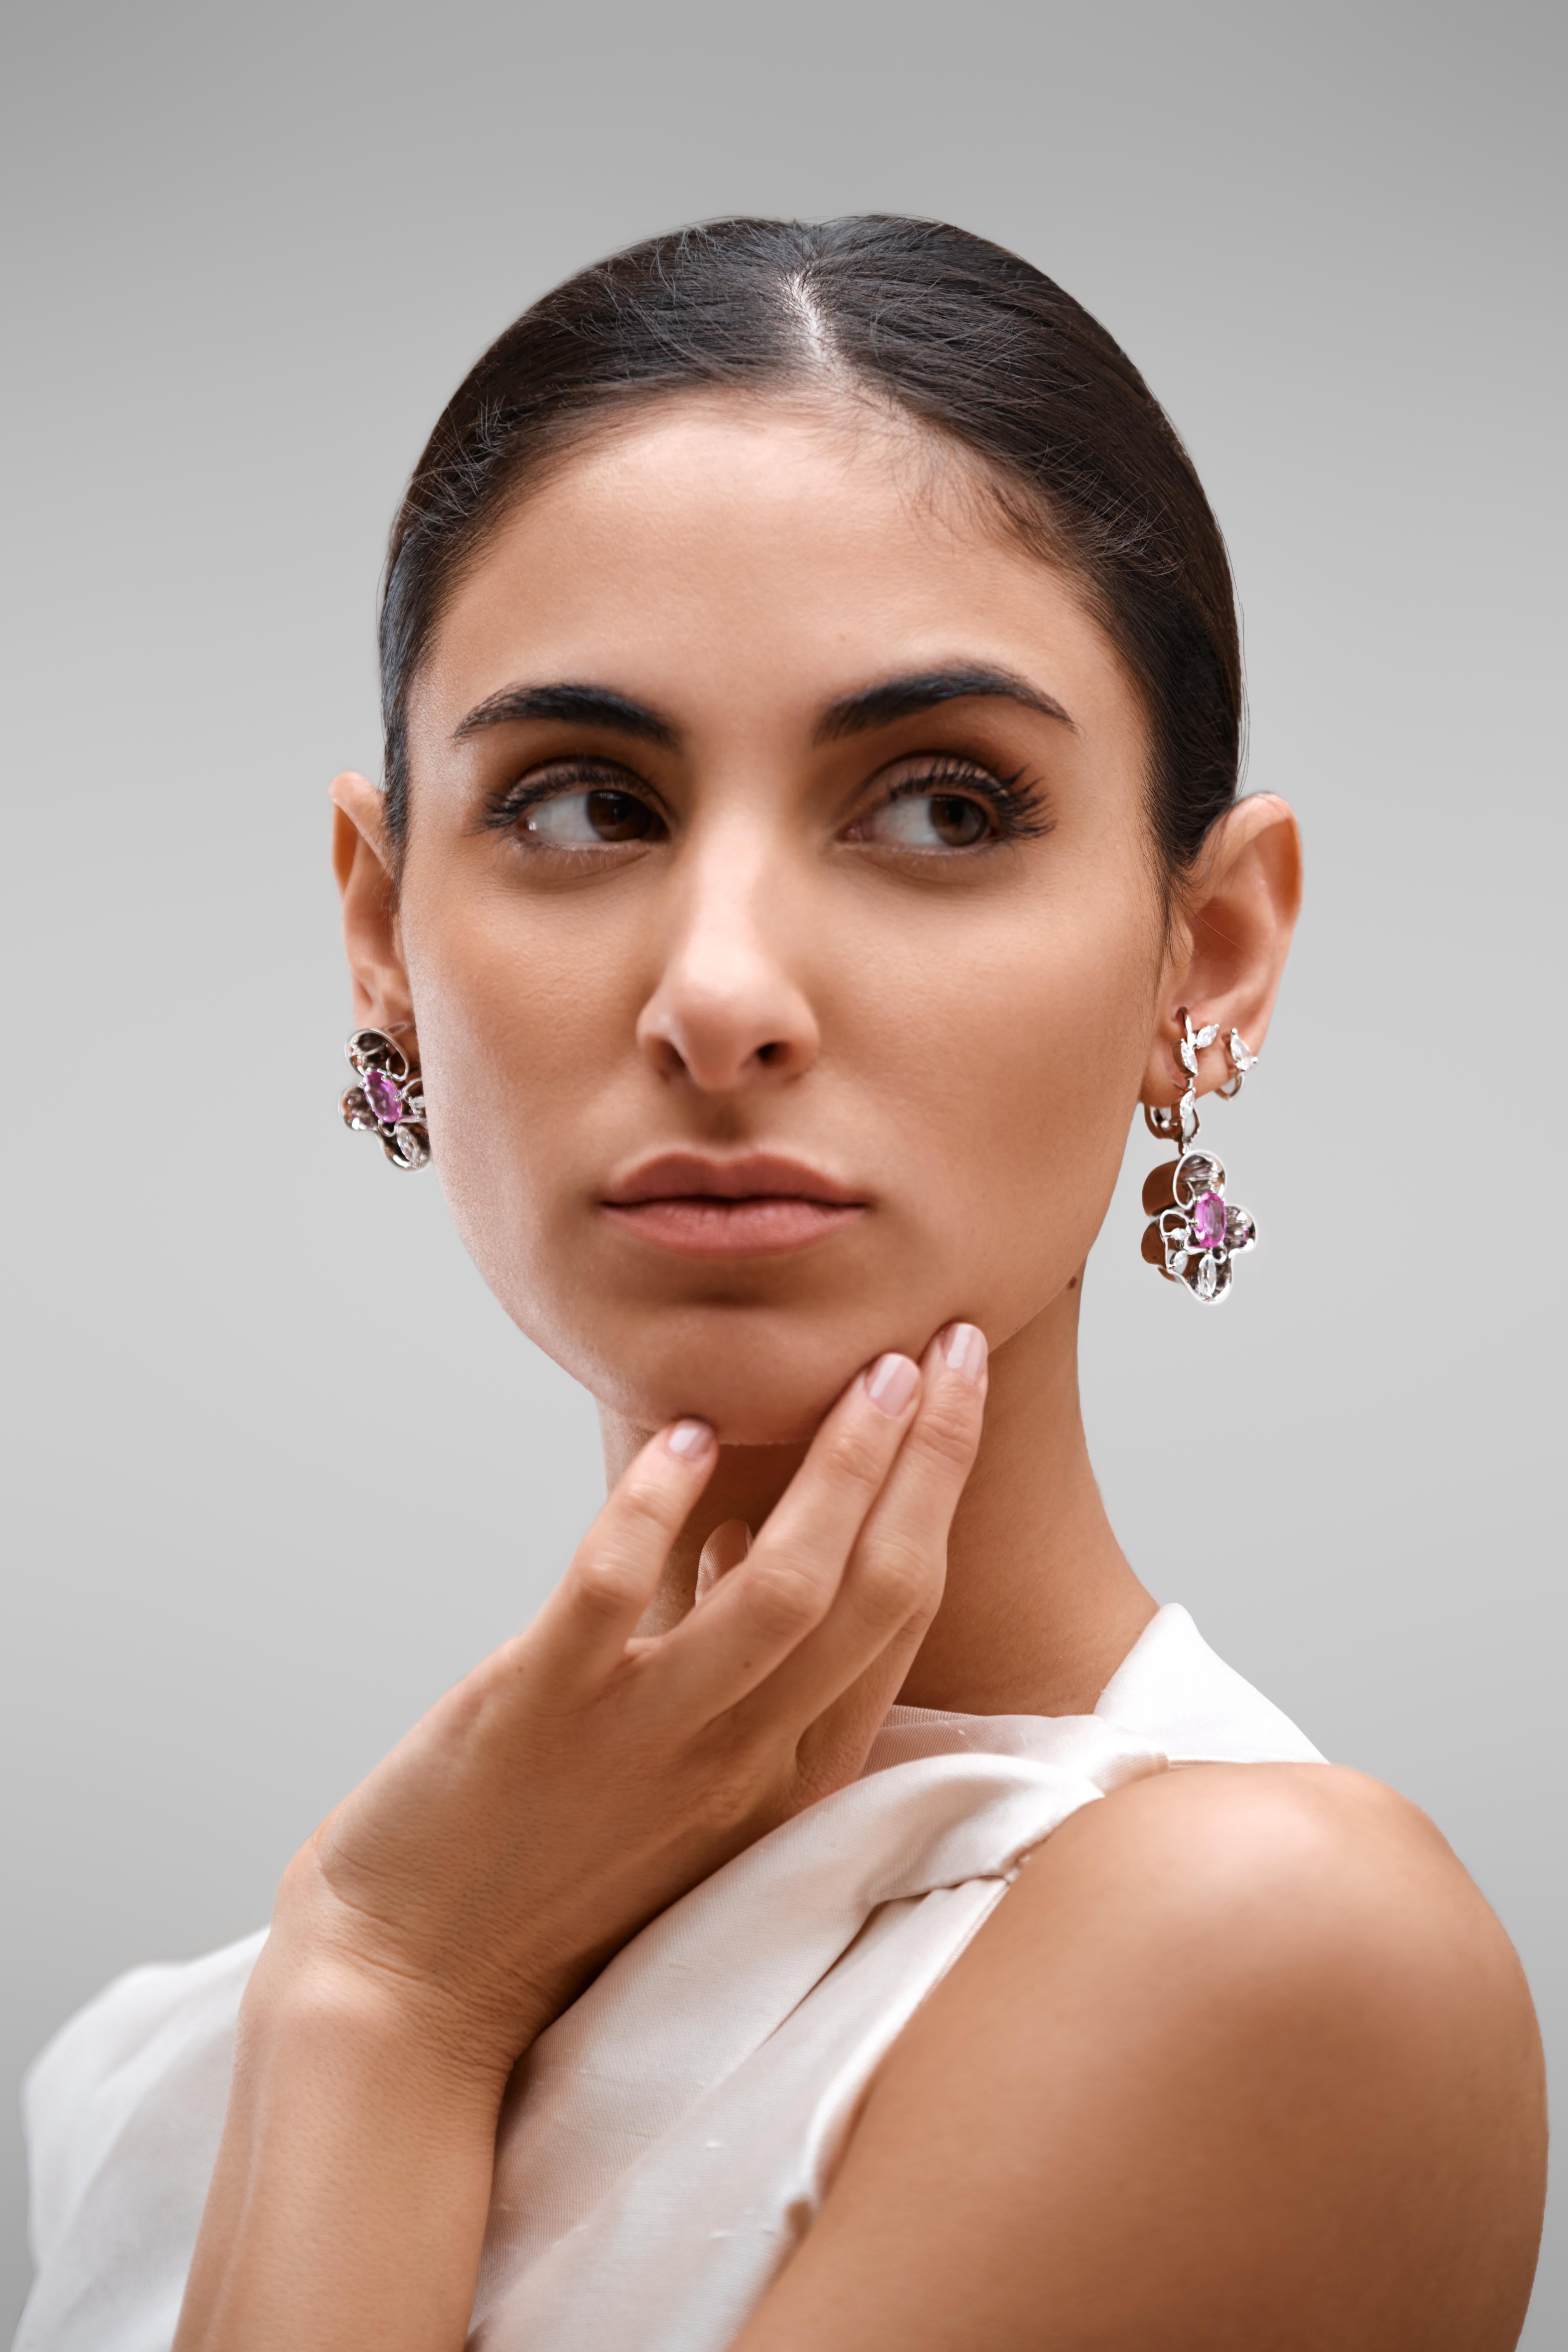 Taif Rose Earrings
Roses have always been a strong symbol of beauty, and every spring, the city of Taif blooms pink and red with them.
The roses of Taif are famous for their beauty and aroma, but they also boast health and beauty benefits. In the